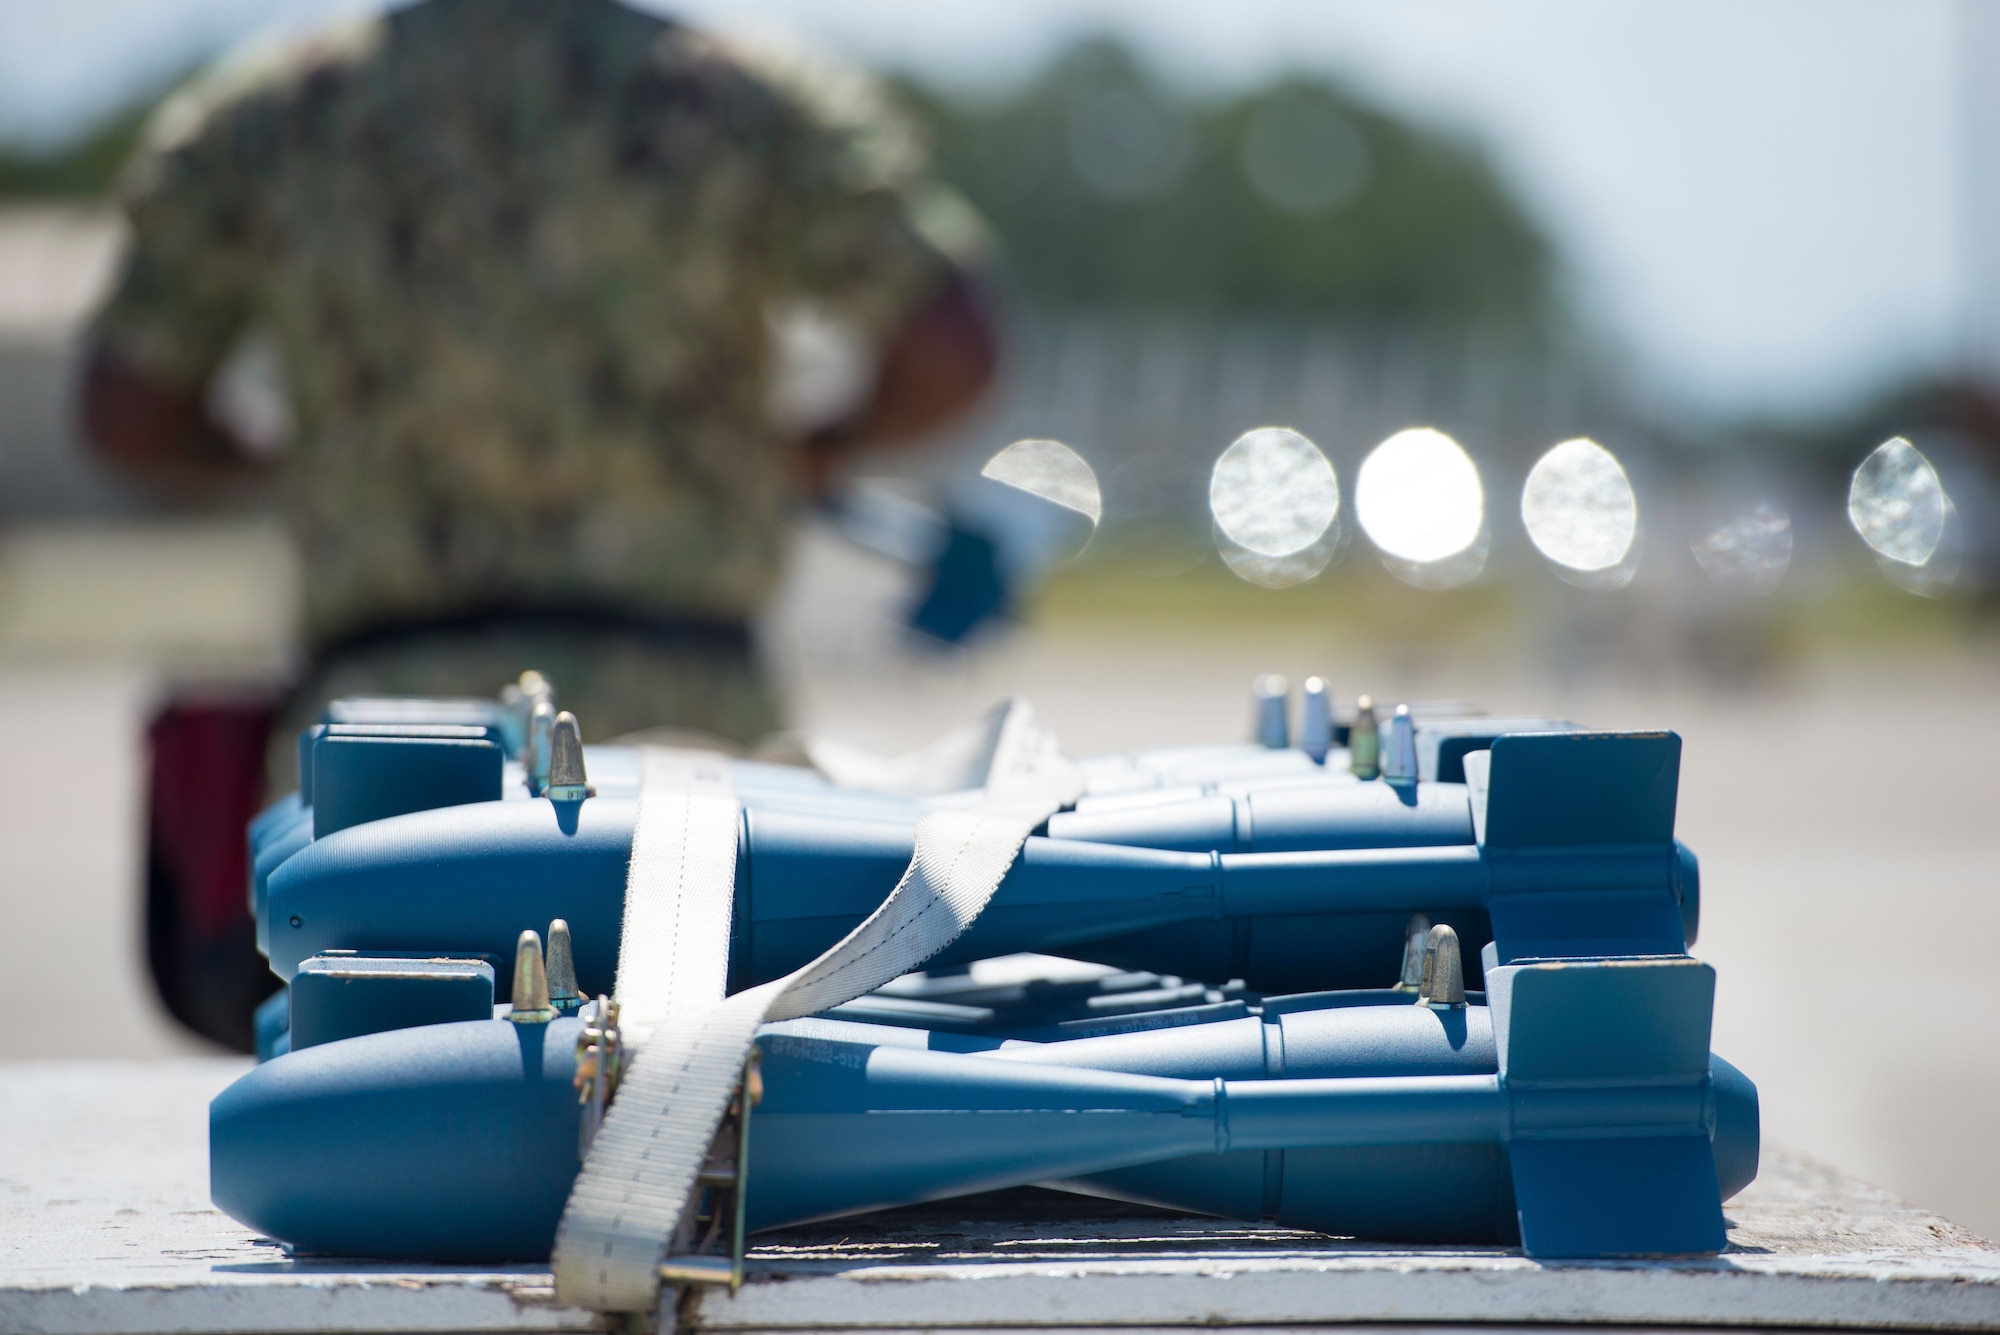 U.S. Navy Sailors with the Strike Fighter Squadron 106 from Naval Air Station Oceania, Va., secure Mk-76 practice bombs before a training exercise at MacDill Air Force Base, Fla., Oct. 1, 2019.